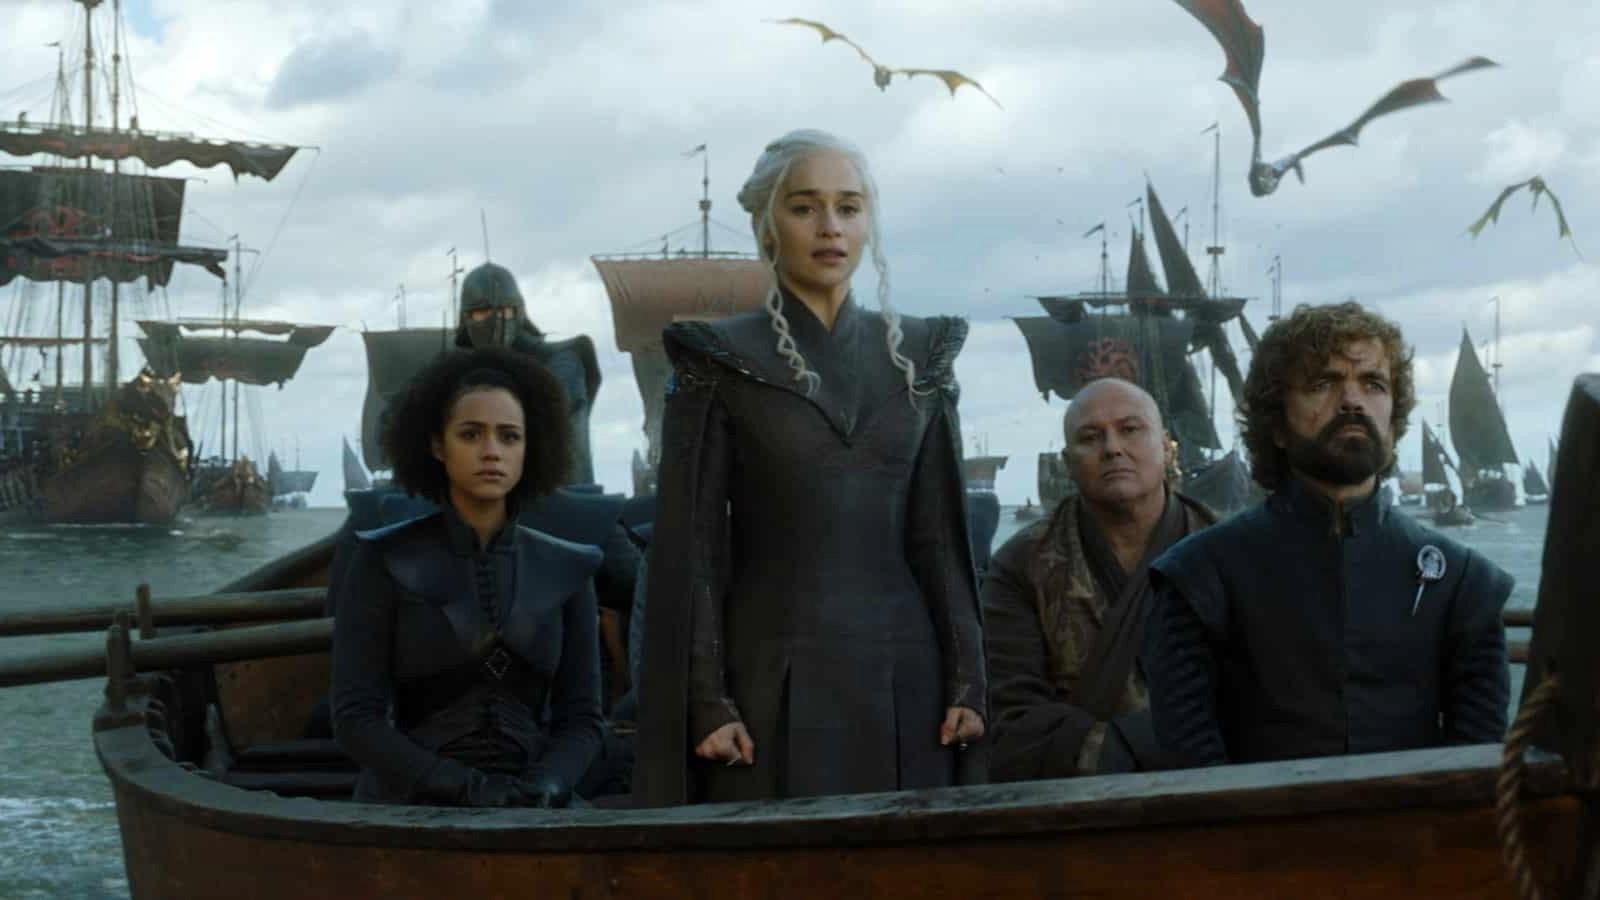 The cast of Game of Thrones on boat with dragons above